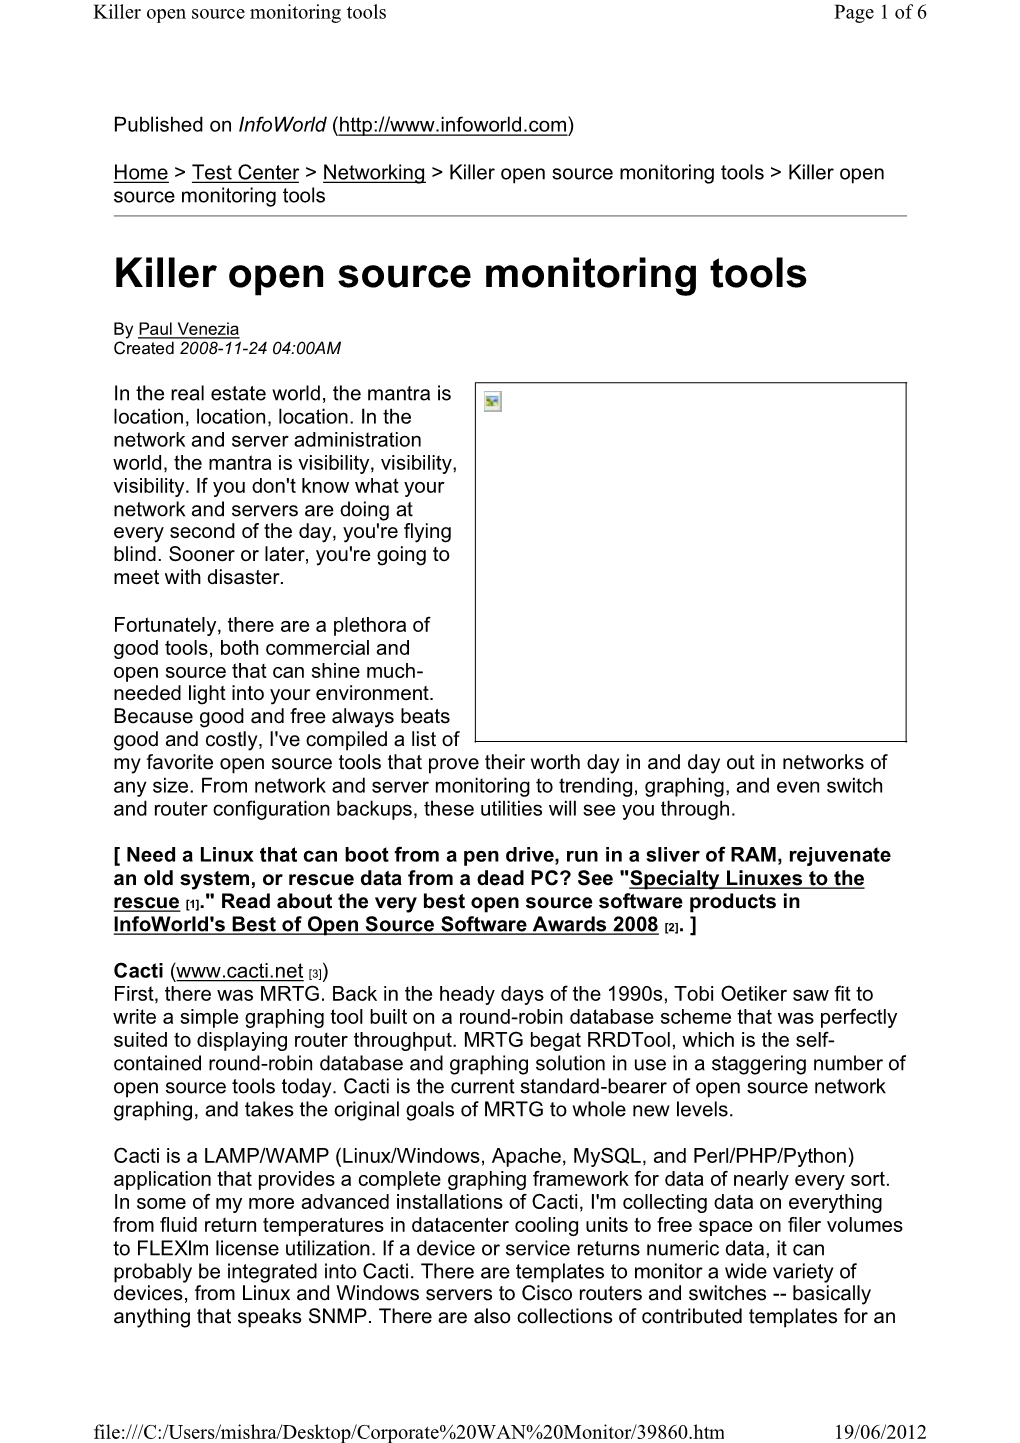 Killer Open Source Monitoring Tools Page 1 of 6